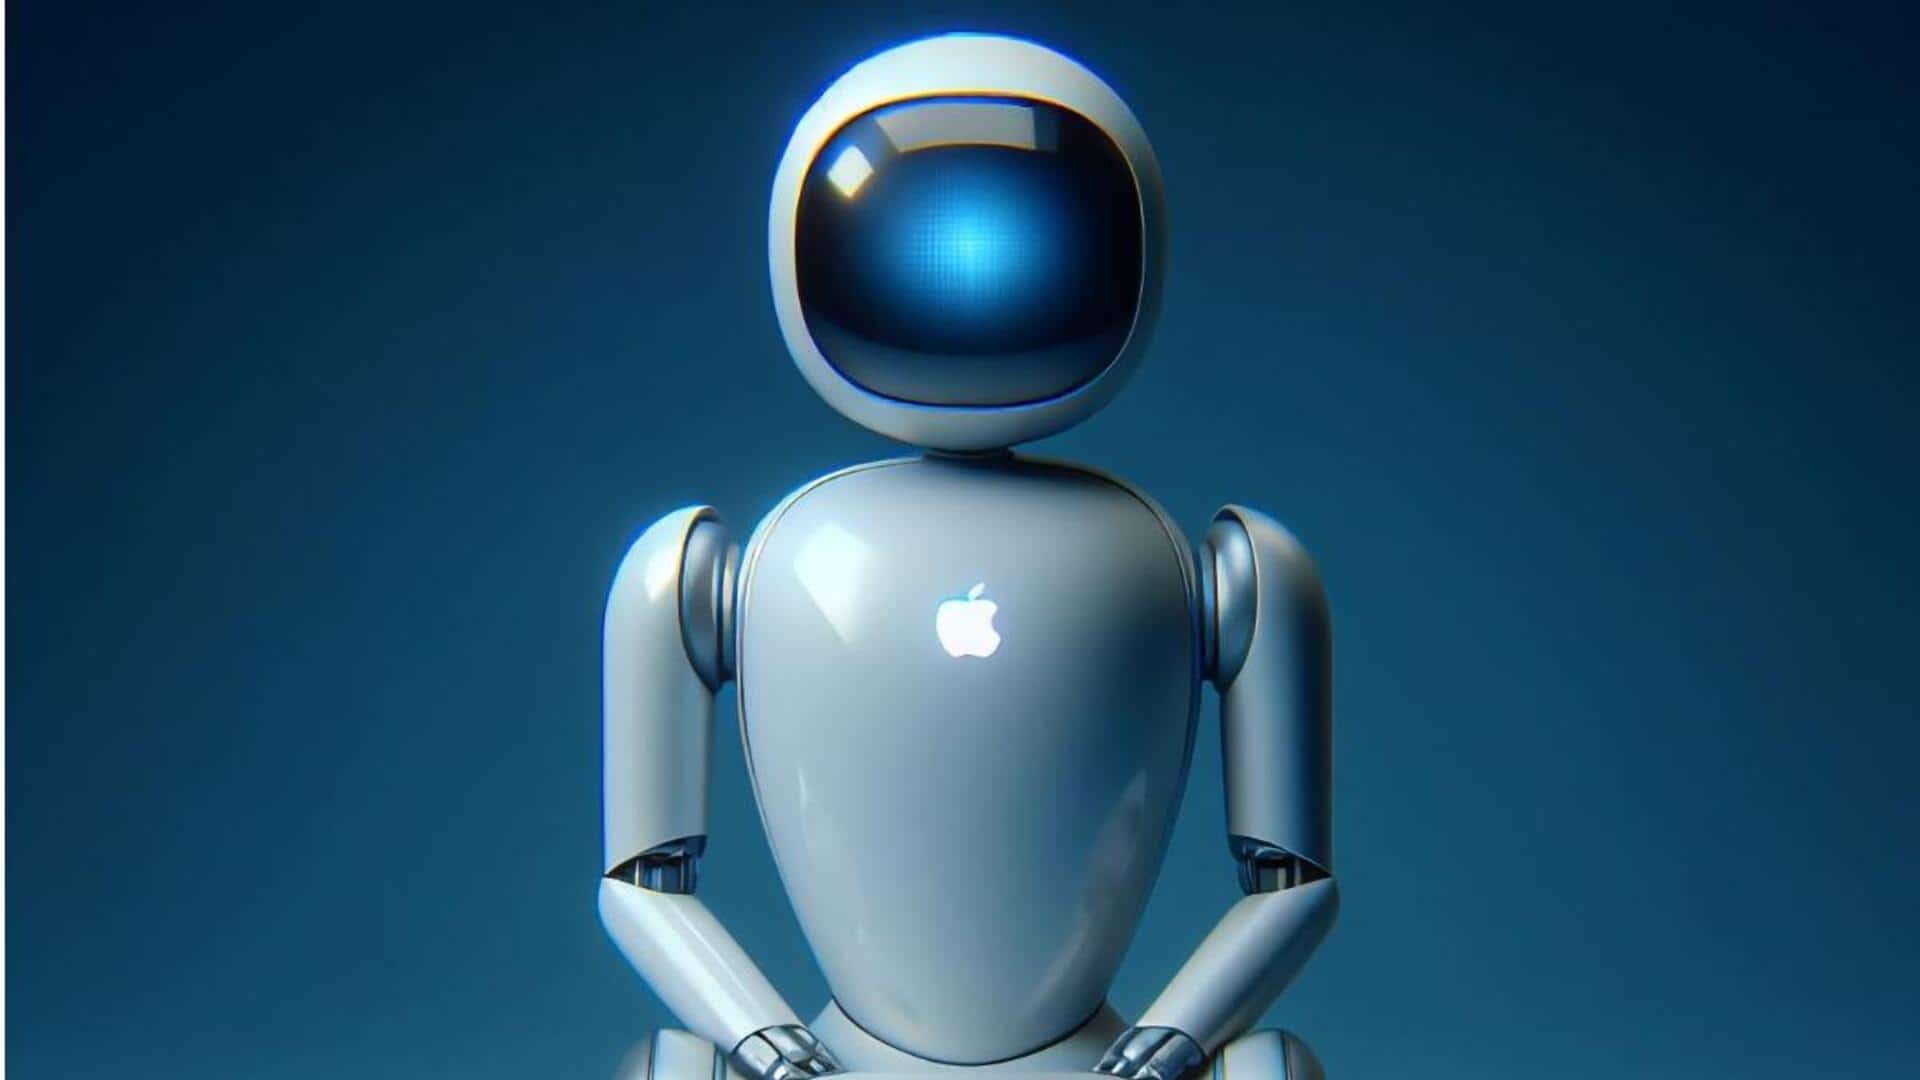 Apple's 'next big thing' could be personal robots